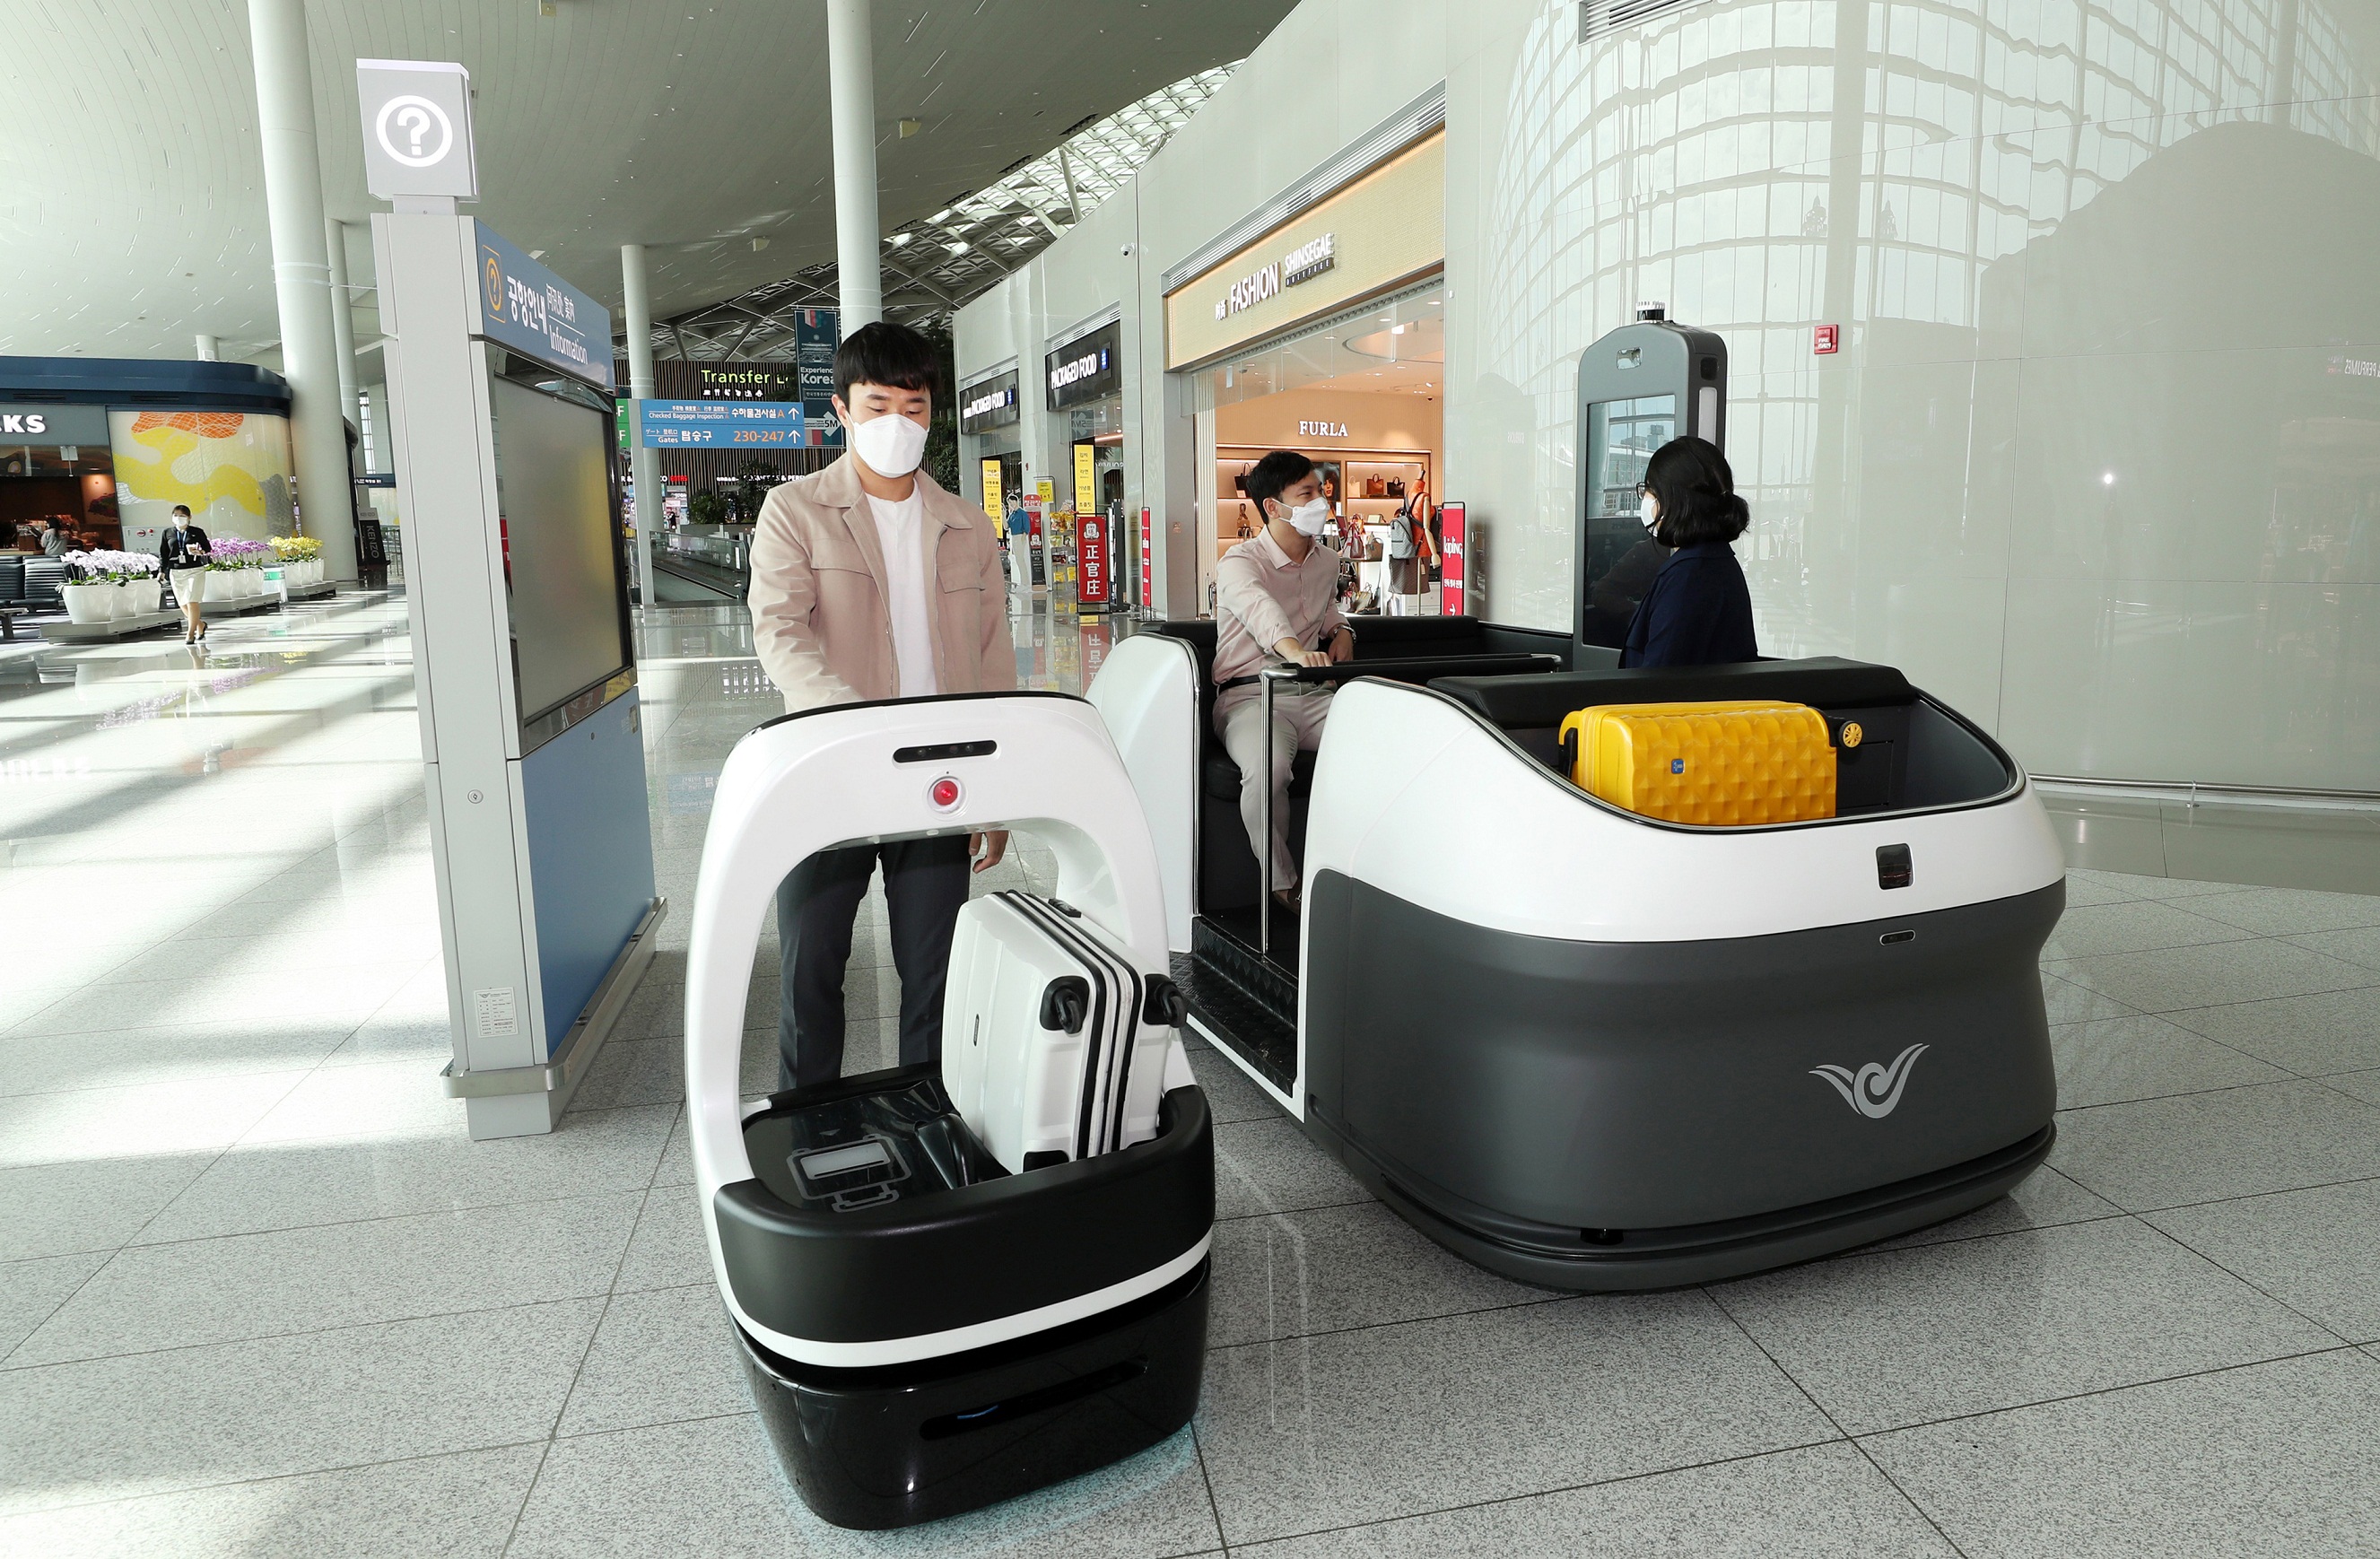 Incheon, South Korea.- The photo shows employees of Incheon International Airport, on October 14, 2020, conducting a test operation of an autonomous driving vehicle and an autonomous robot cart in the pre-boarding area of the second terminal of the airport.